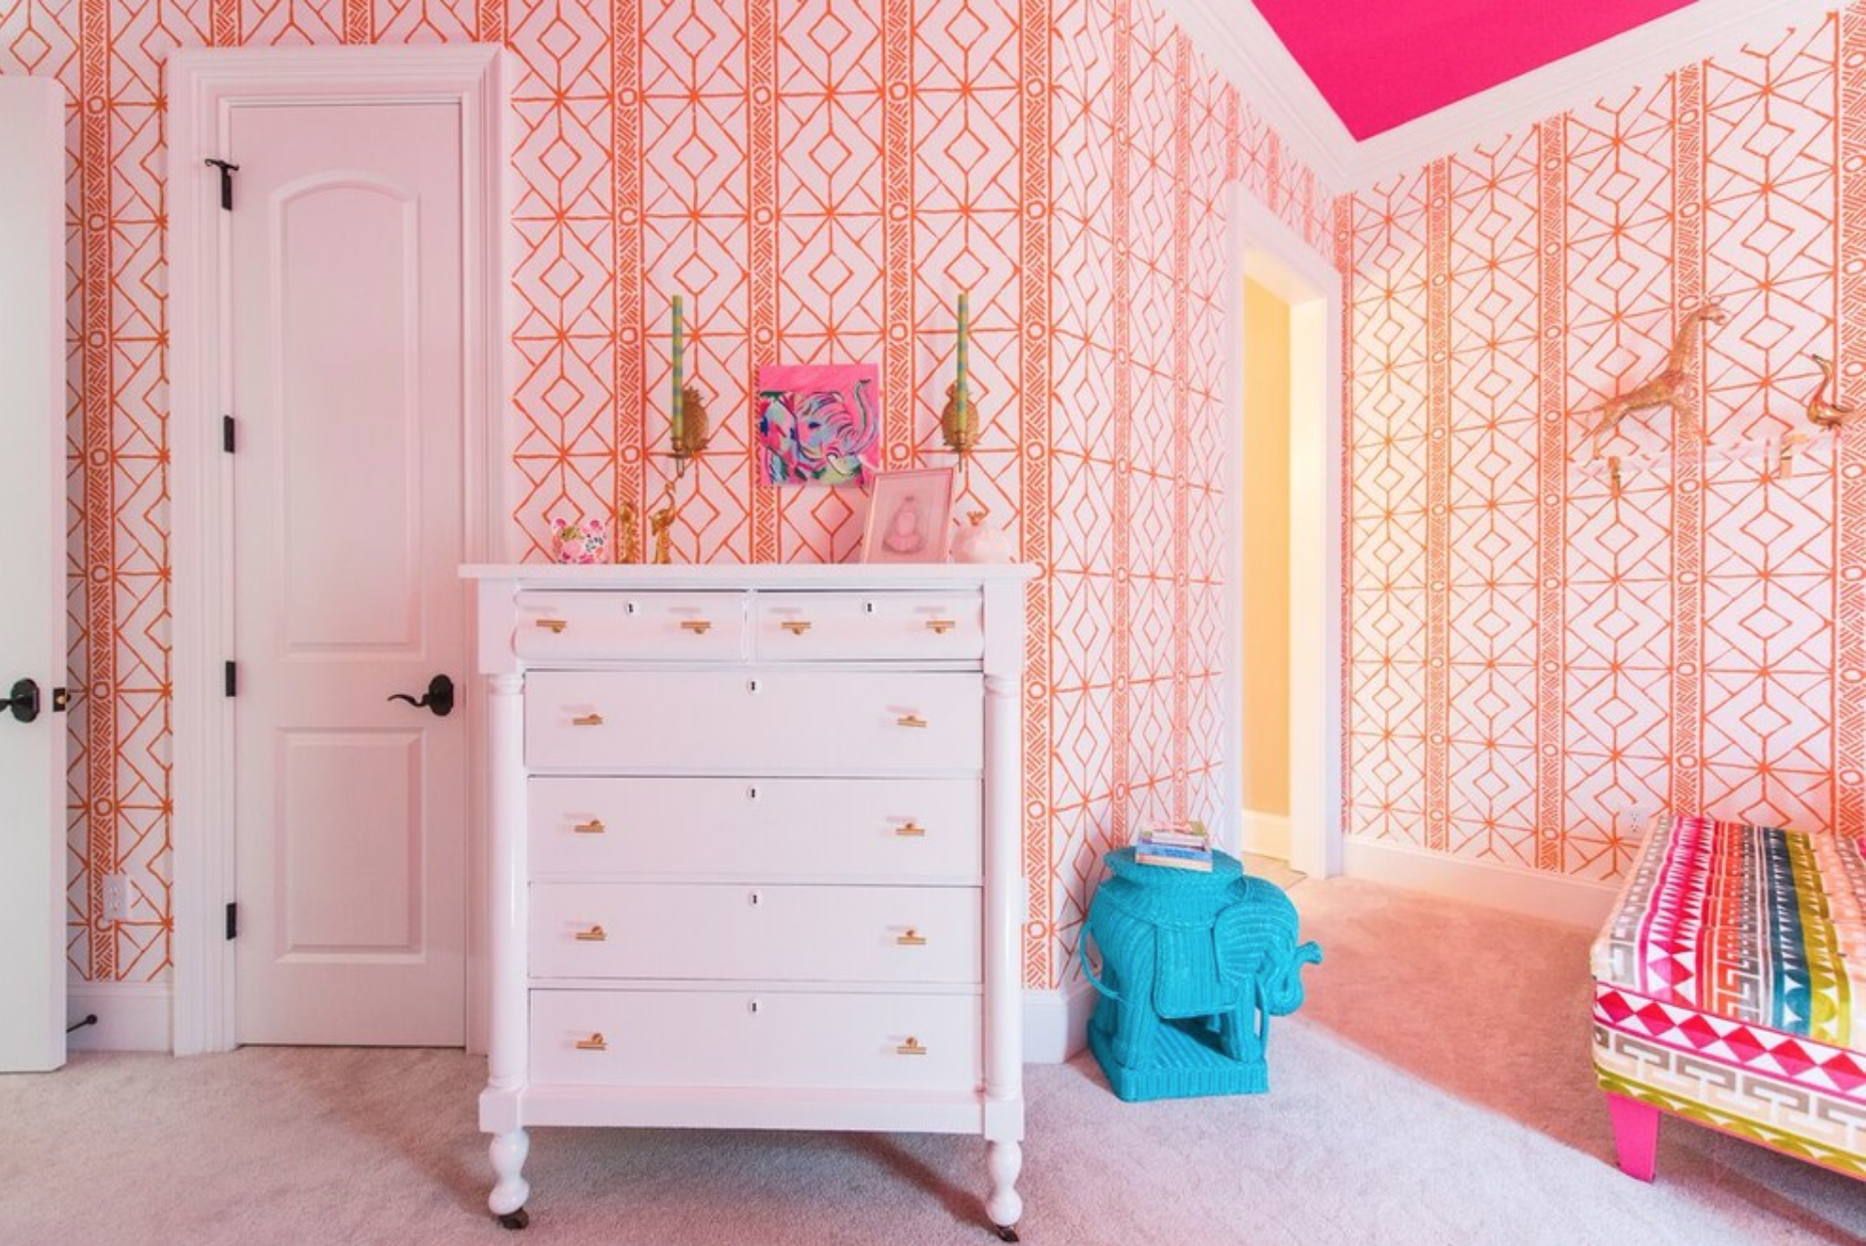 Dwell-Chic-Pink-Paradise-Bedroom-Dresser-And-Wallpaper.png